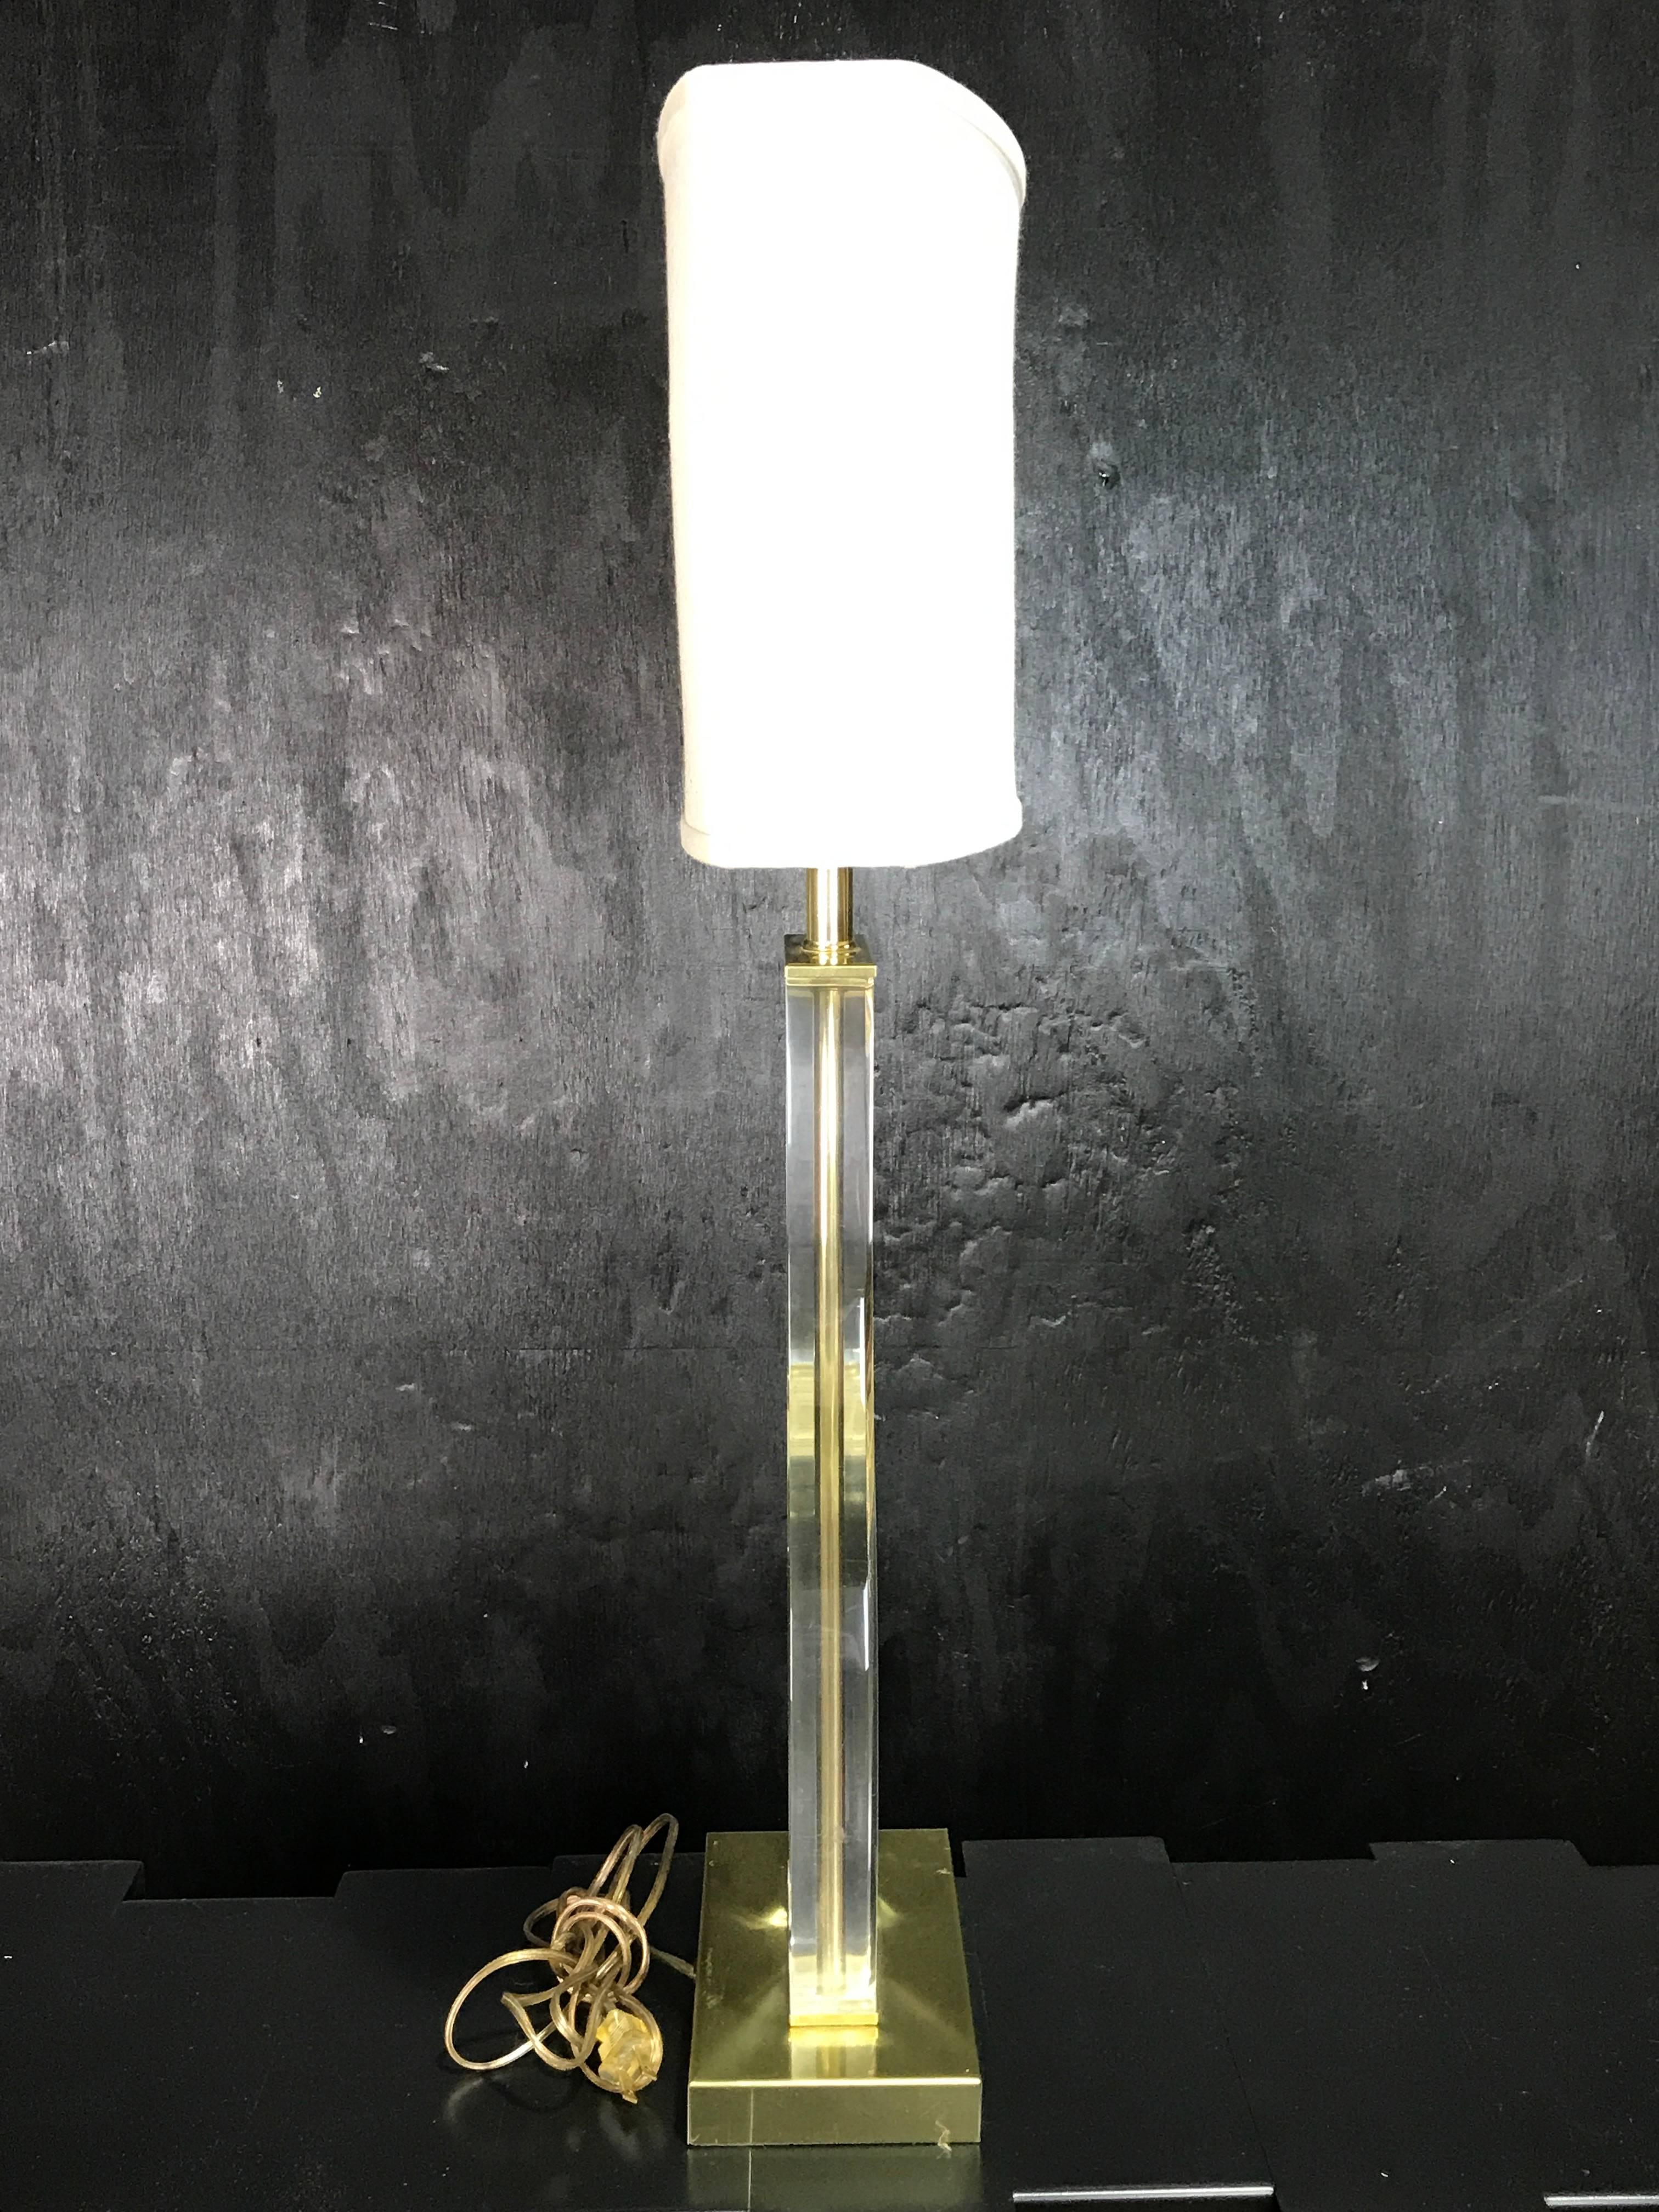 Pair of sculptural motif brass and Lucite table lamps, each one clear and crisp with brass mounts
18